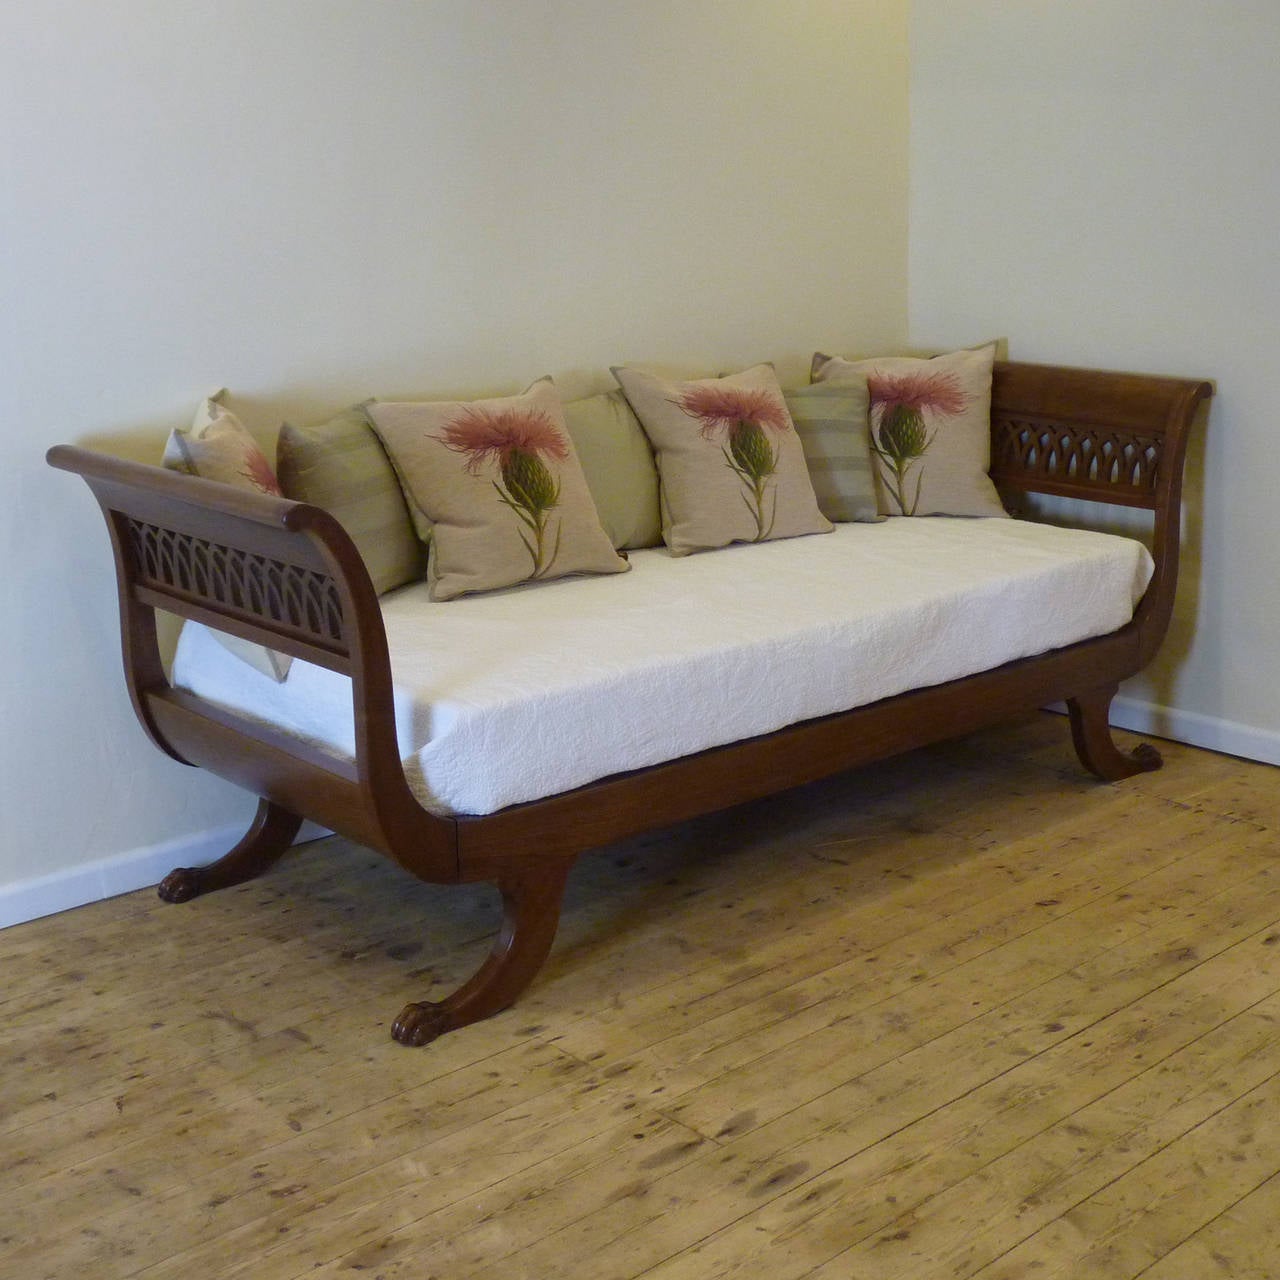 A superb example of a mahogany day bed from the mid-Twentieth Century with 